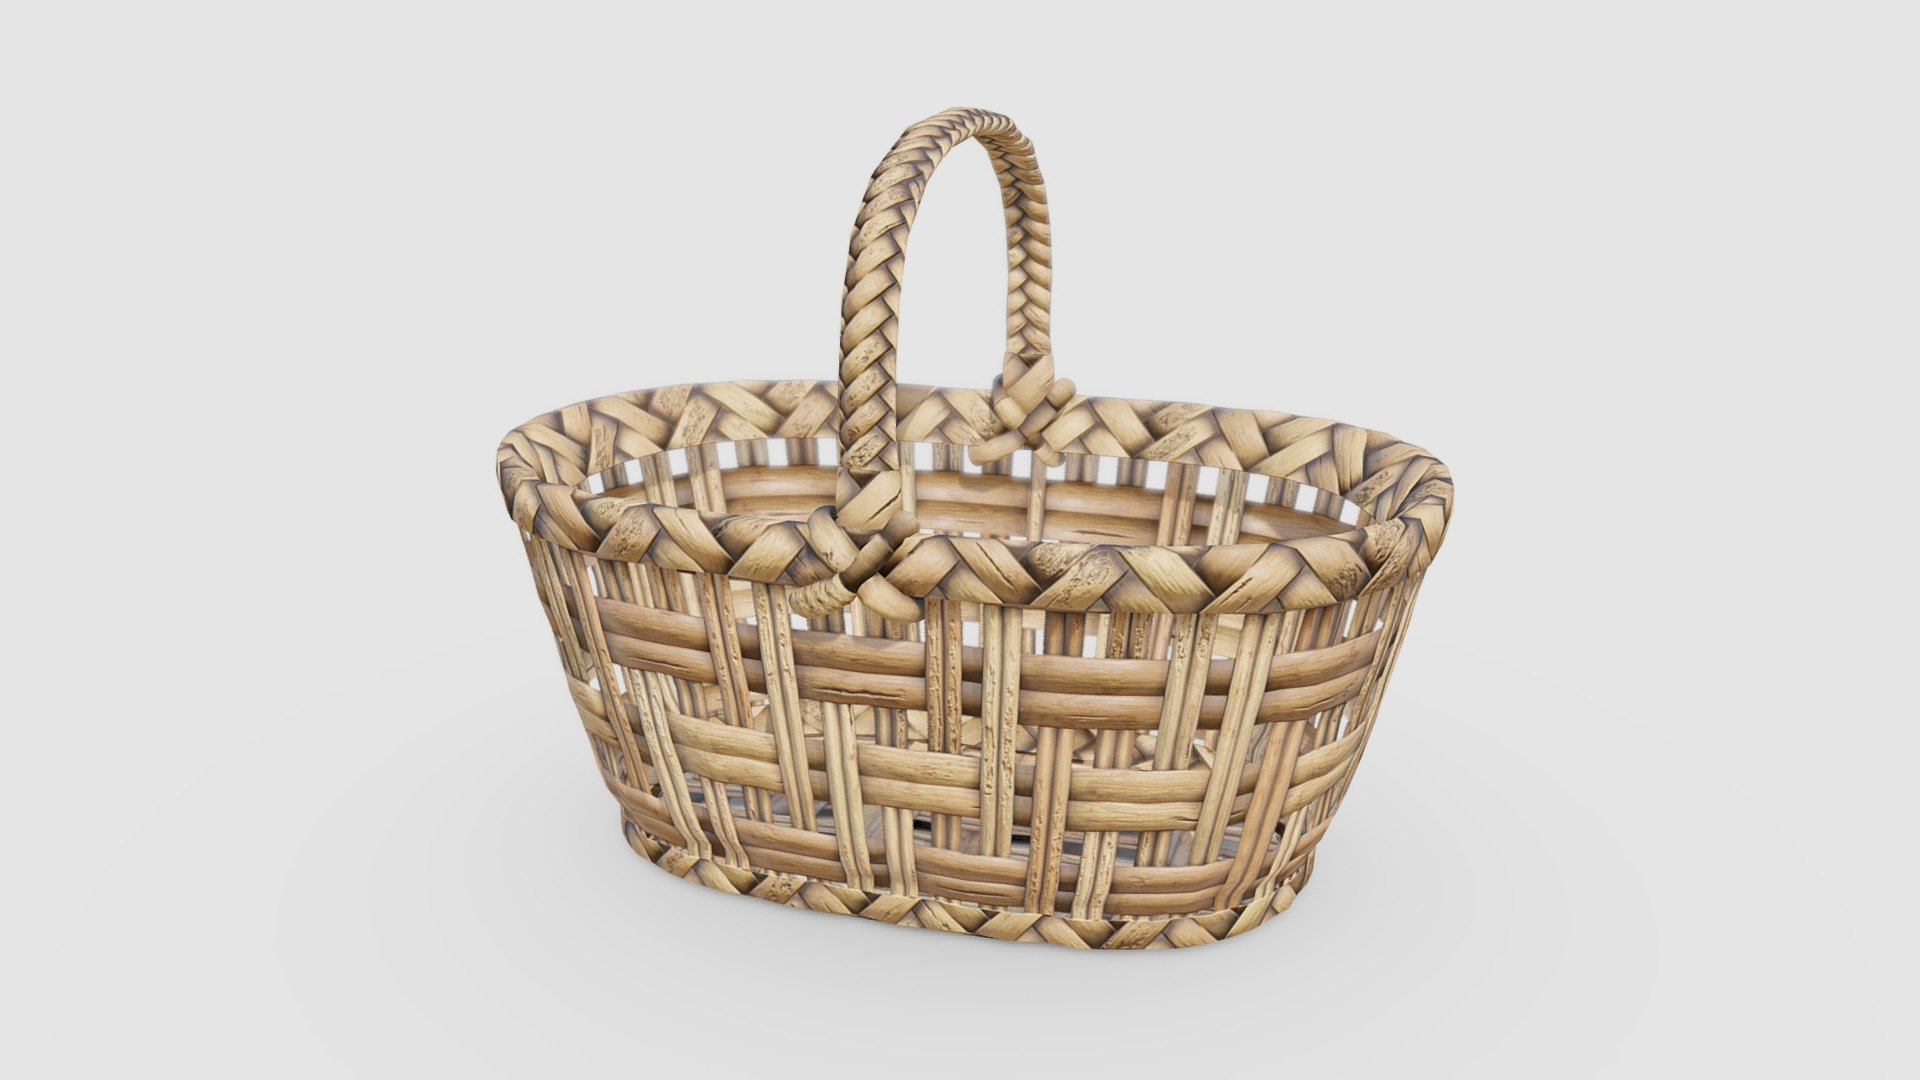 Check out my website for more products and better deals!   👉 SM5 by Heledahn 👈


This is a digital 3d model of a a wicker basket. The basket is braided by hand, using natural wicker and rope. The surface is weathered with dust and dirt, giving the appearance of being heavily used.

Textures come in 4K for perfect closeups.

This product will achieve realistic results in your rendering projects, being greatly suited for close-ups due to their high quality topology and PBR shading 3d model